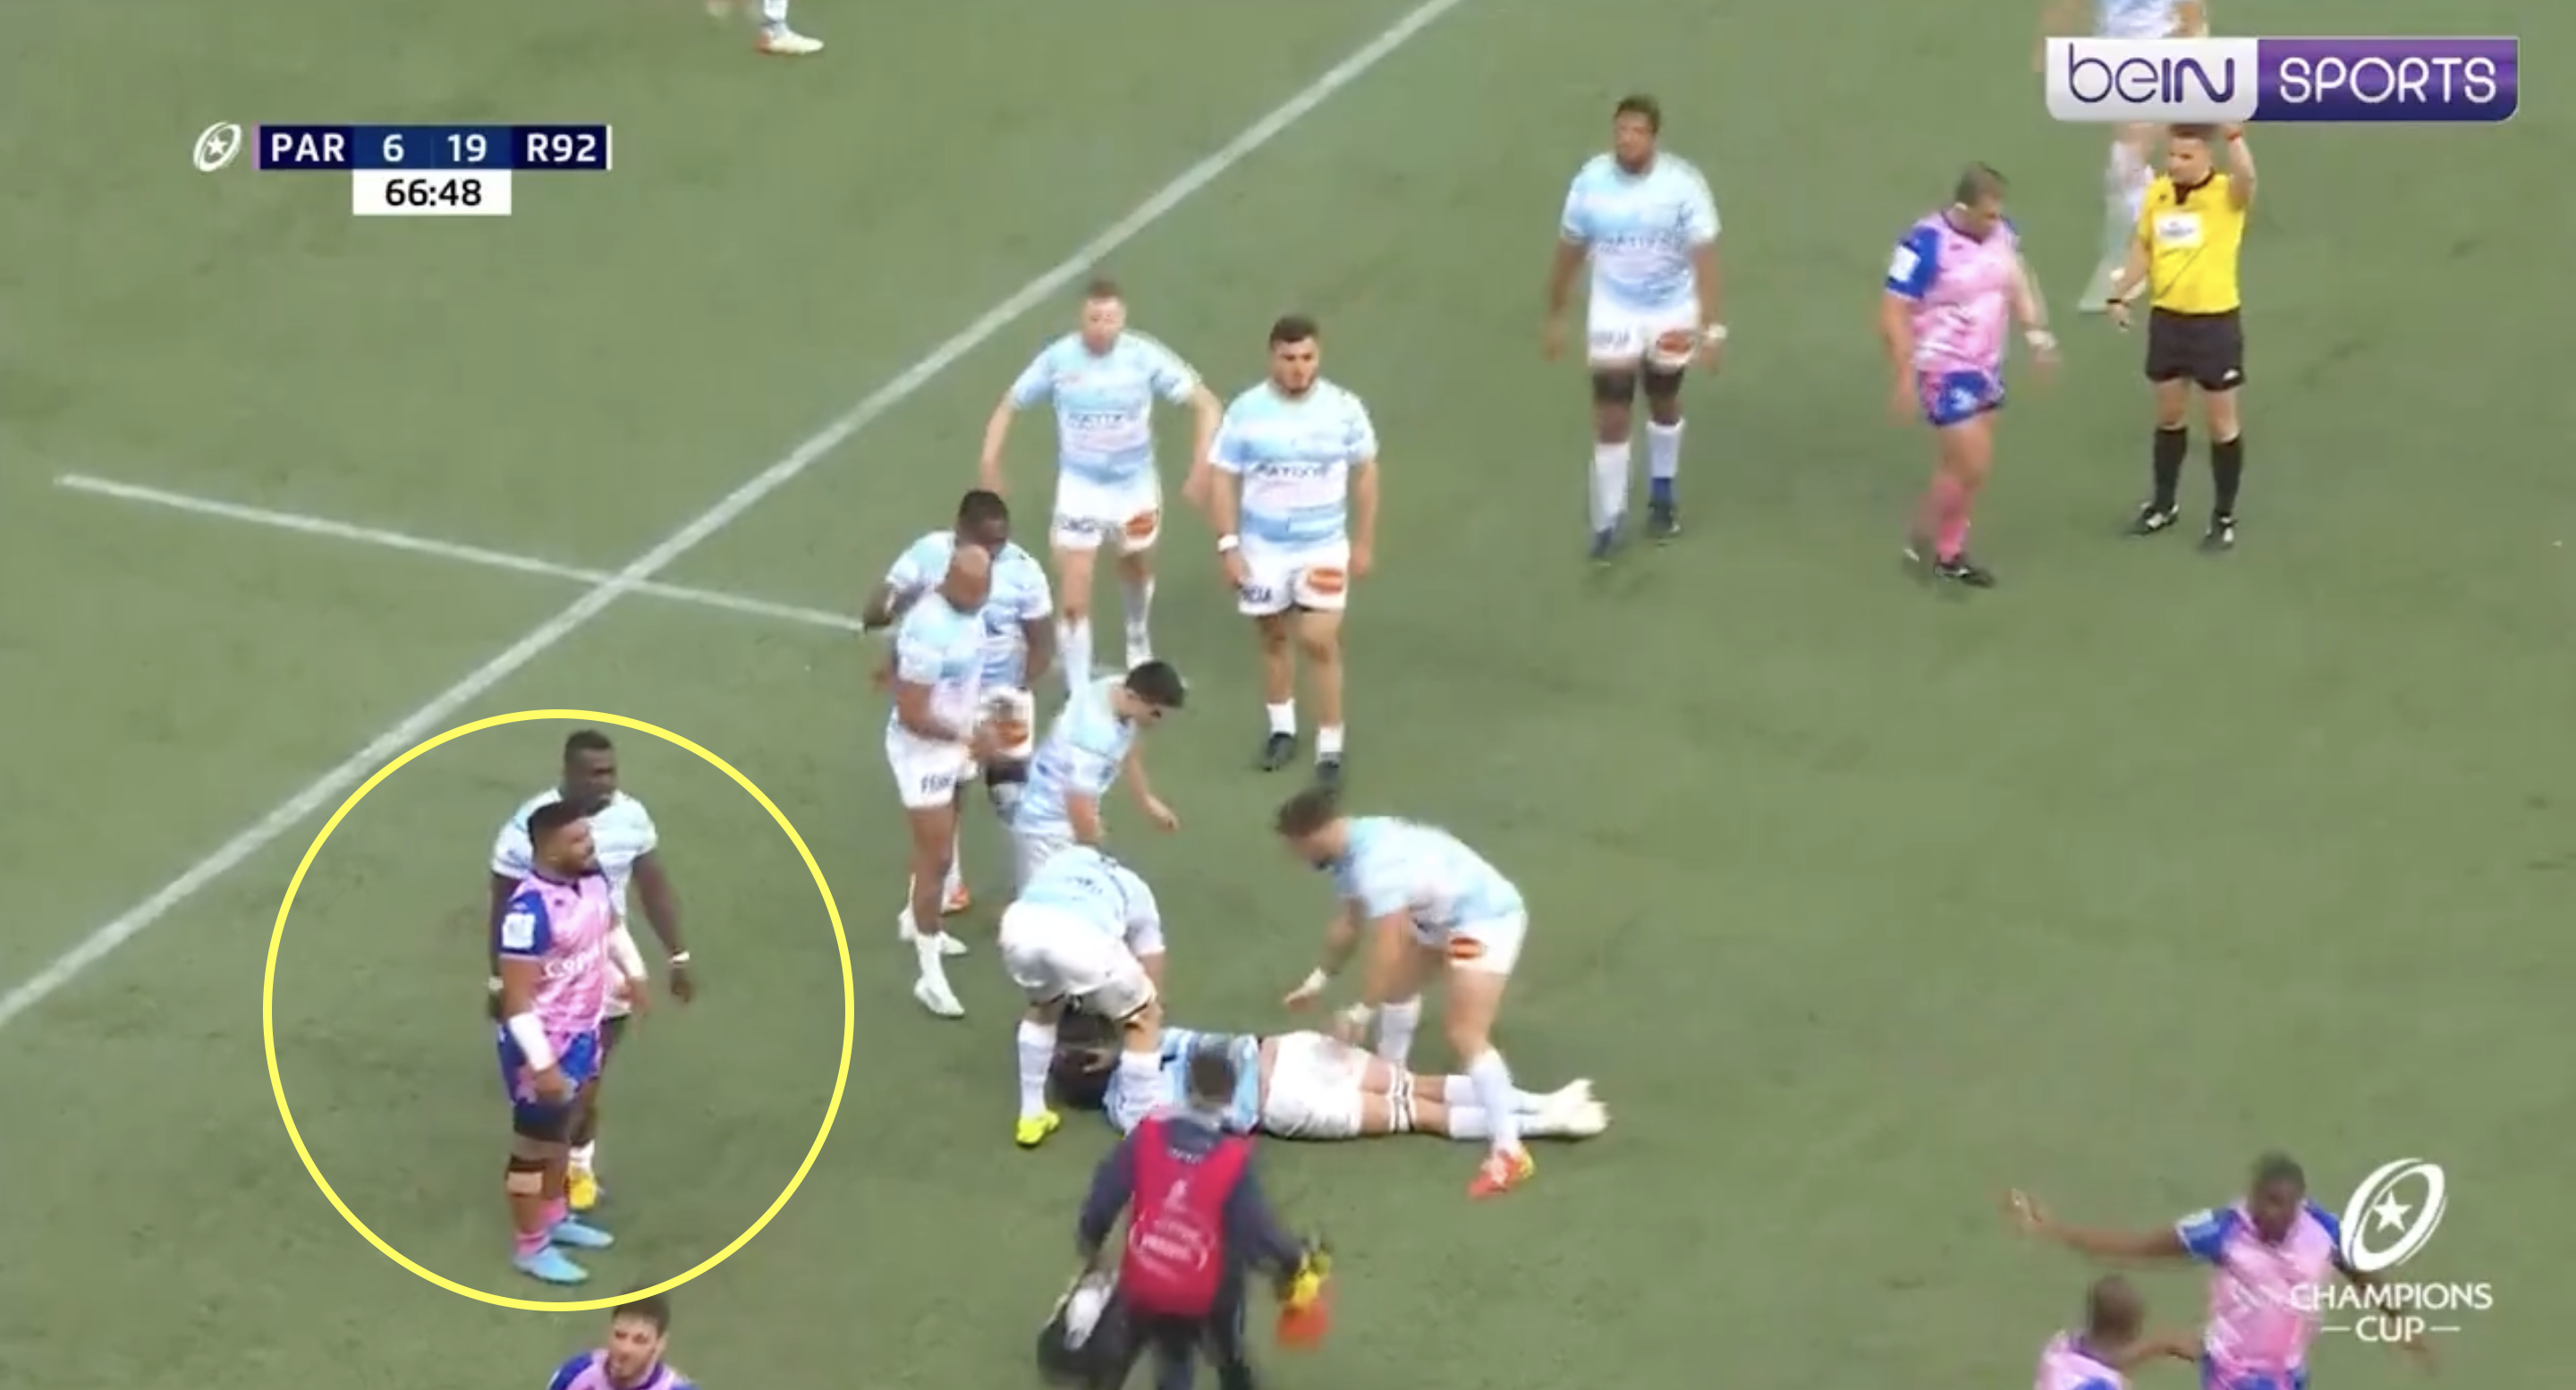 Teammates' reactions to Latu red are spotted and it doesn't look good